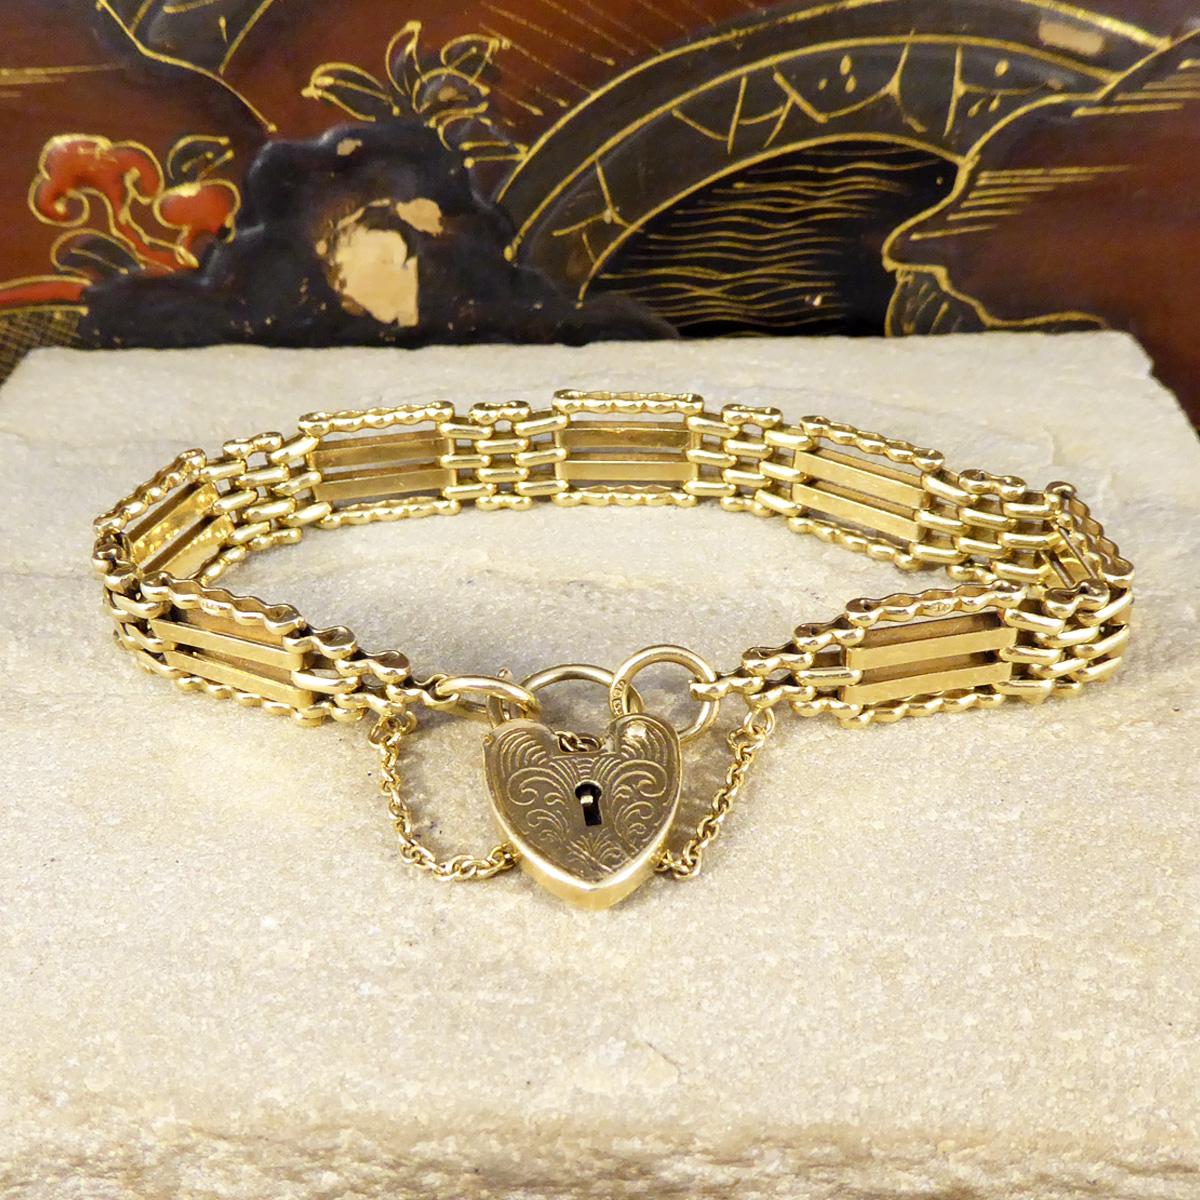 Women's or Men's C1983 Yellow Gold Gate Bracelet with Heart Lock Clasp and Safety Chain